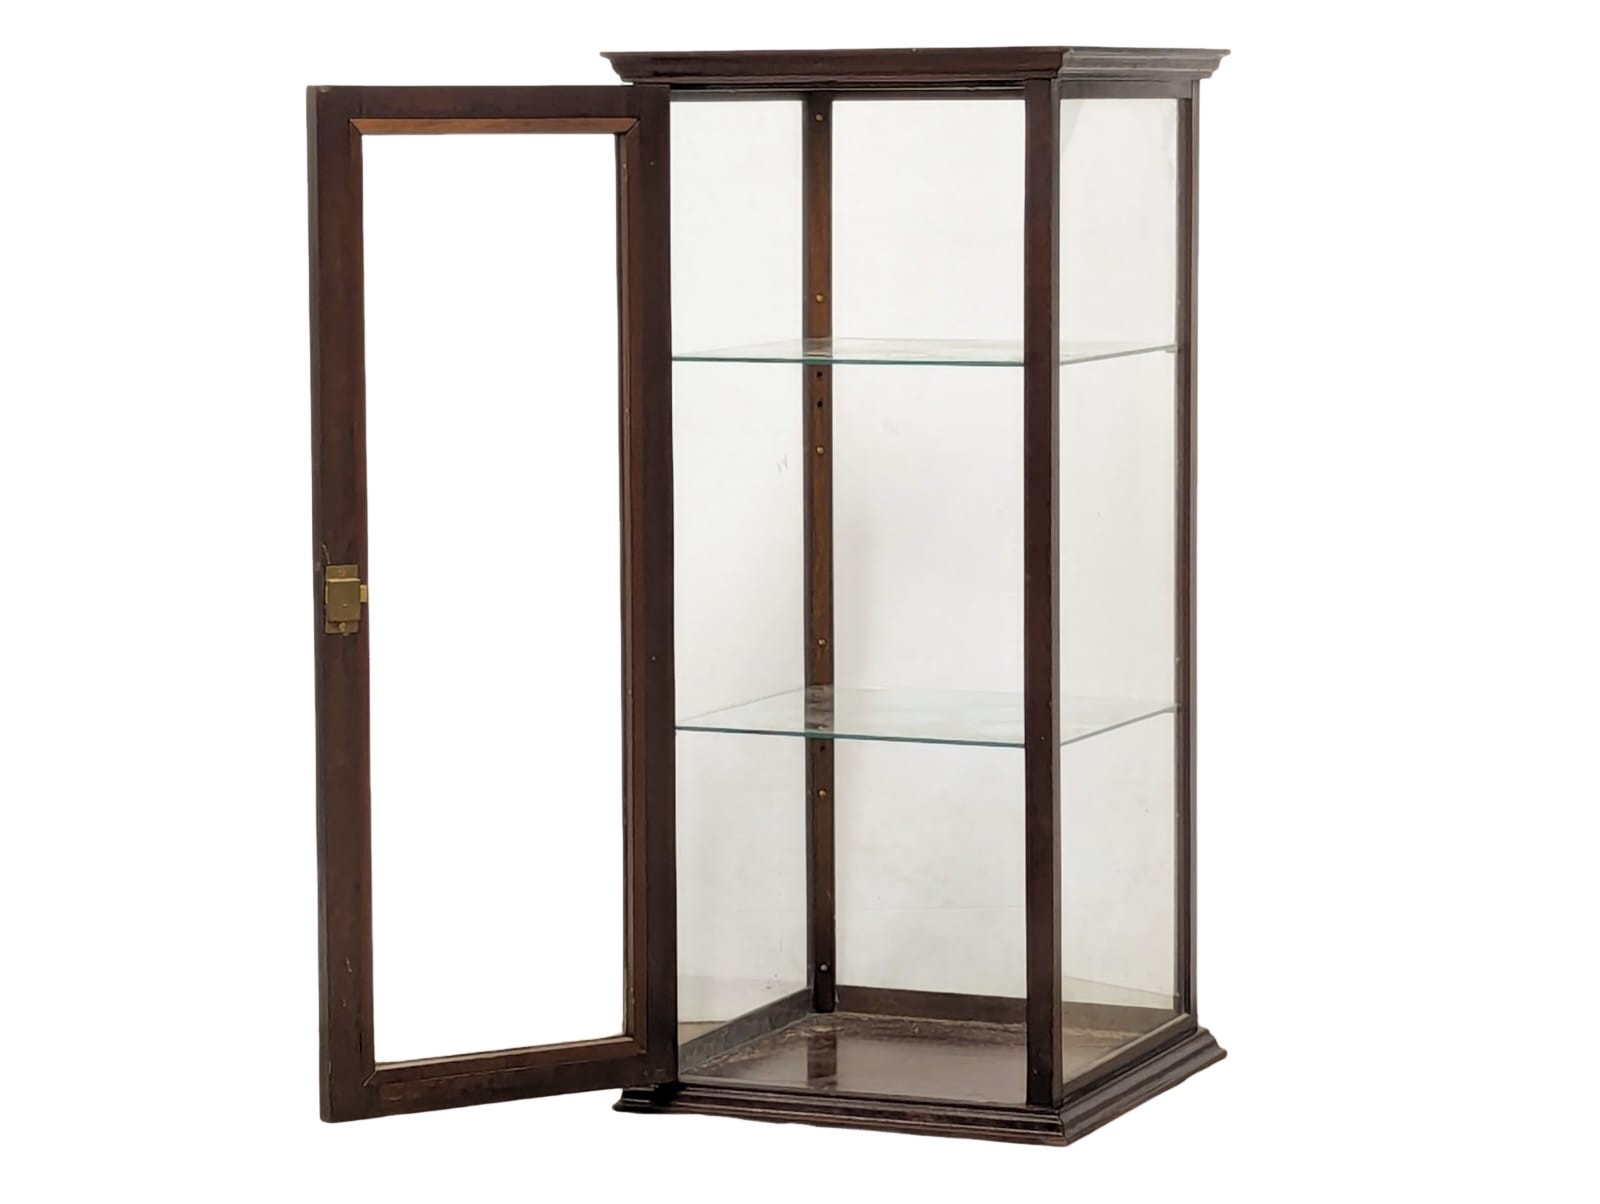 A vintage tabletop mahogany glazed display cabinet with 2 glass shelves. 39x39x84cm - Image 4 of 5